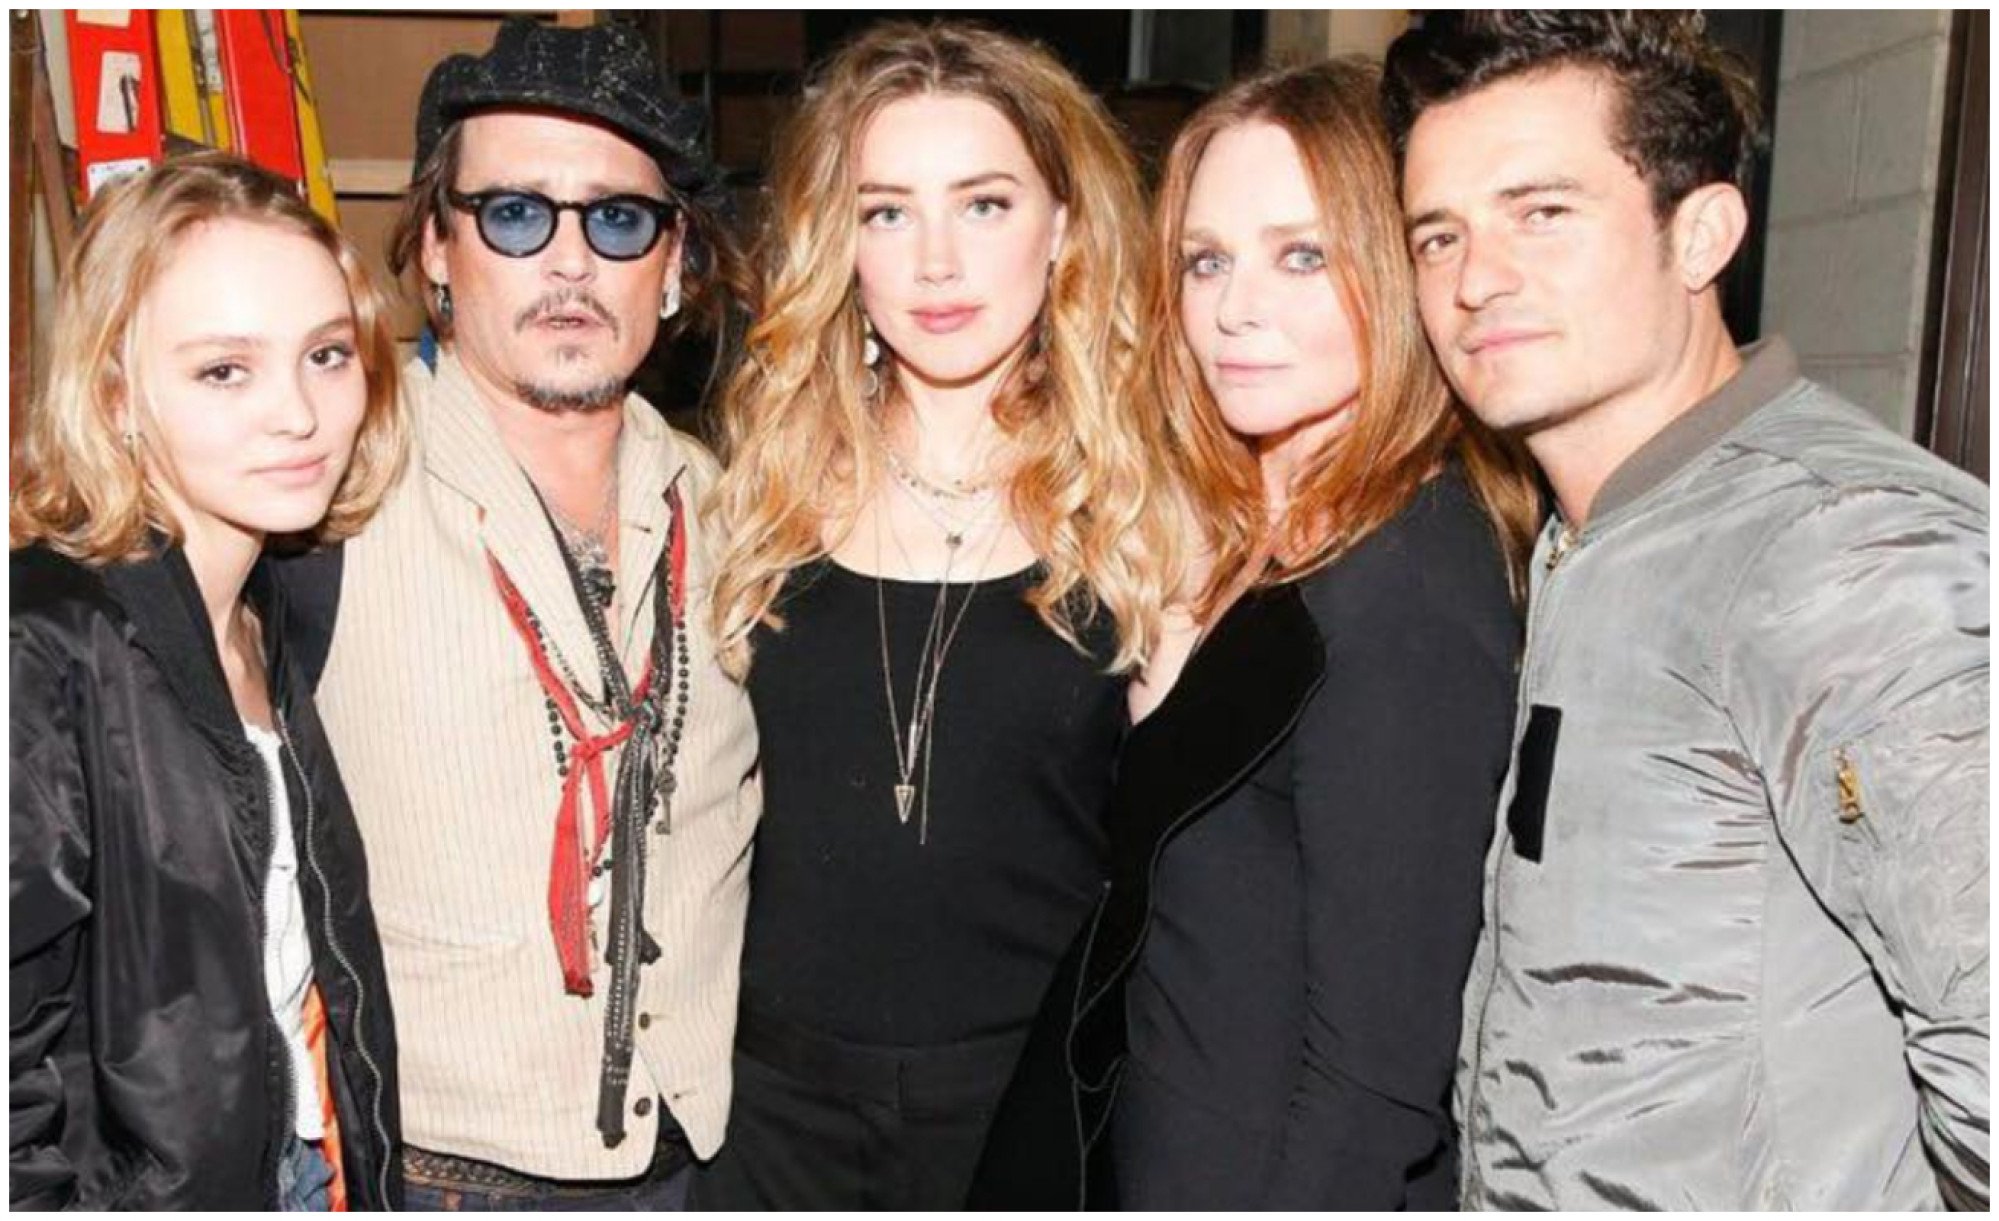 What does LilyRose Depp think of her dad’s ex, Amber Heard? The Chanel